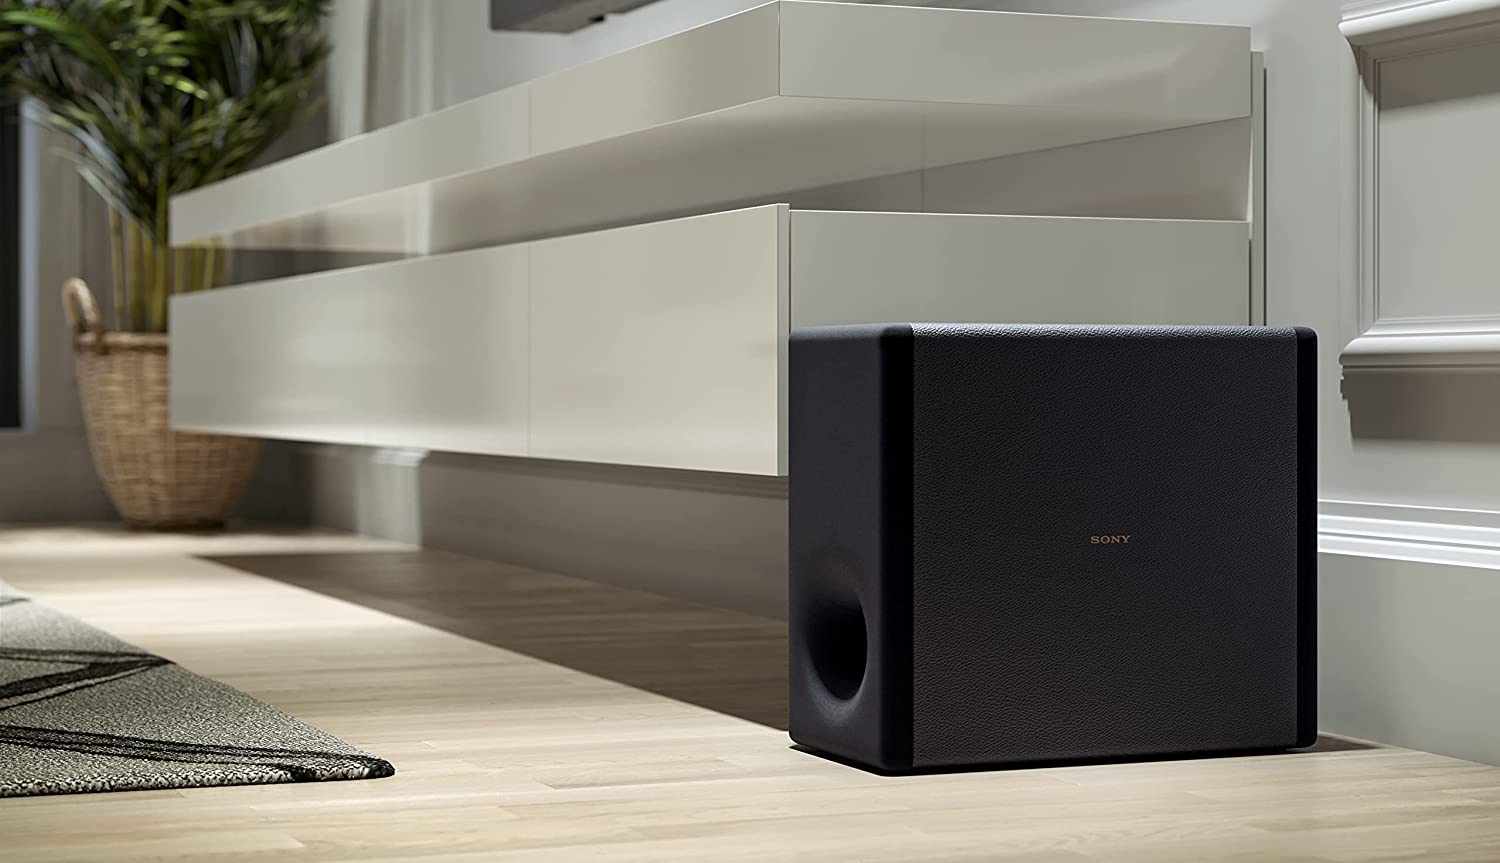 Sony Wireless Subwoofer: A Review of the Latest Technology and Features